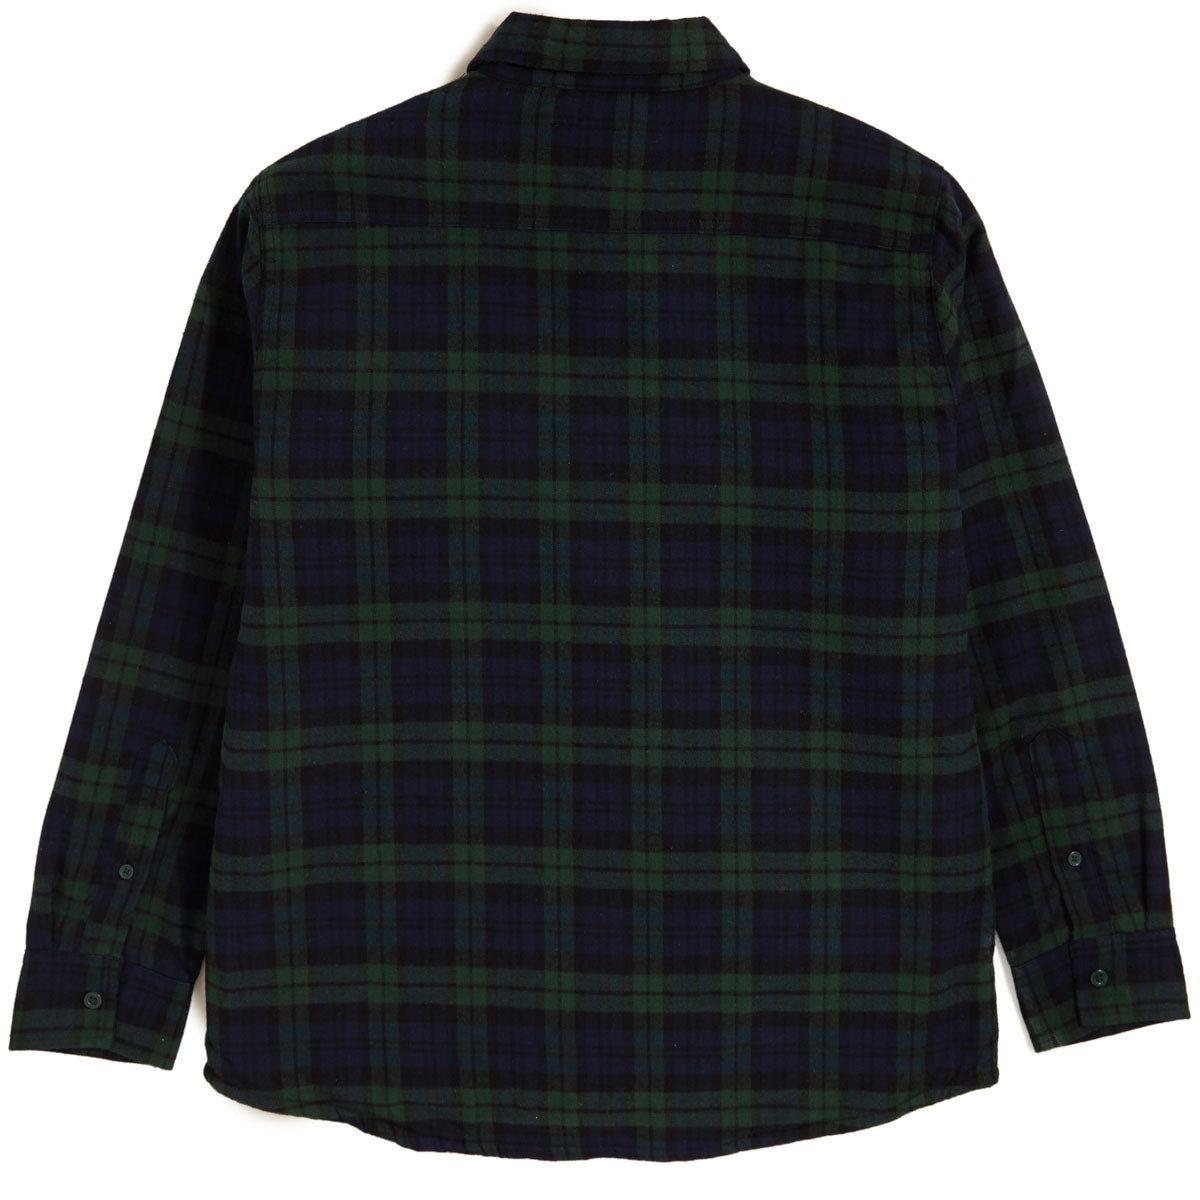 CCS Cheap Skates Quilted Flannel Jacket - Green/Navy image 5